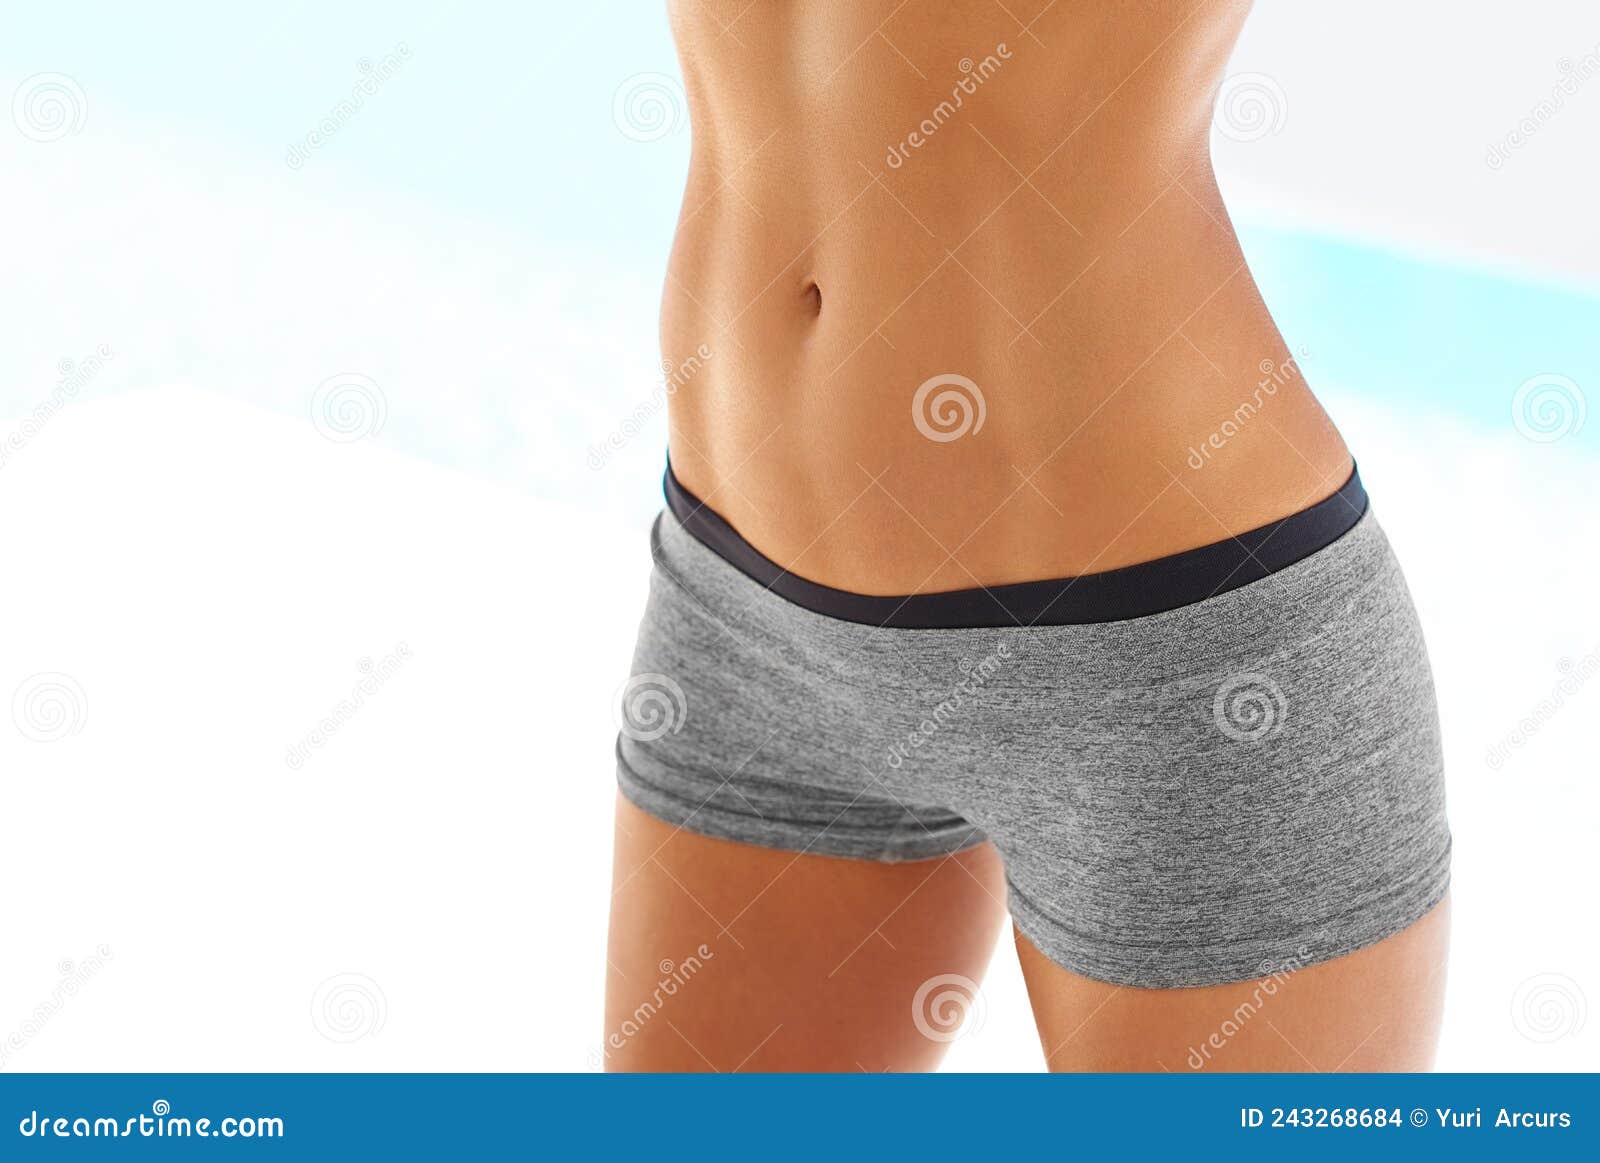 https://thumbs.dreamstime.com/z/cropped-shot-woman-toned-stomach-posing-outdoors-sportswear-you-earn-your-body-243268684.jpg